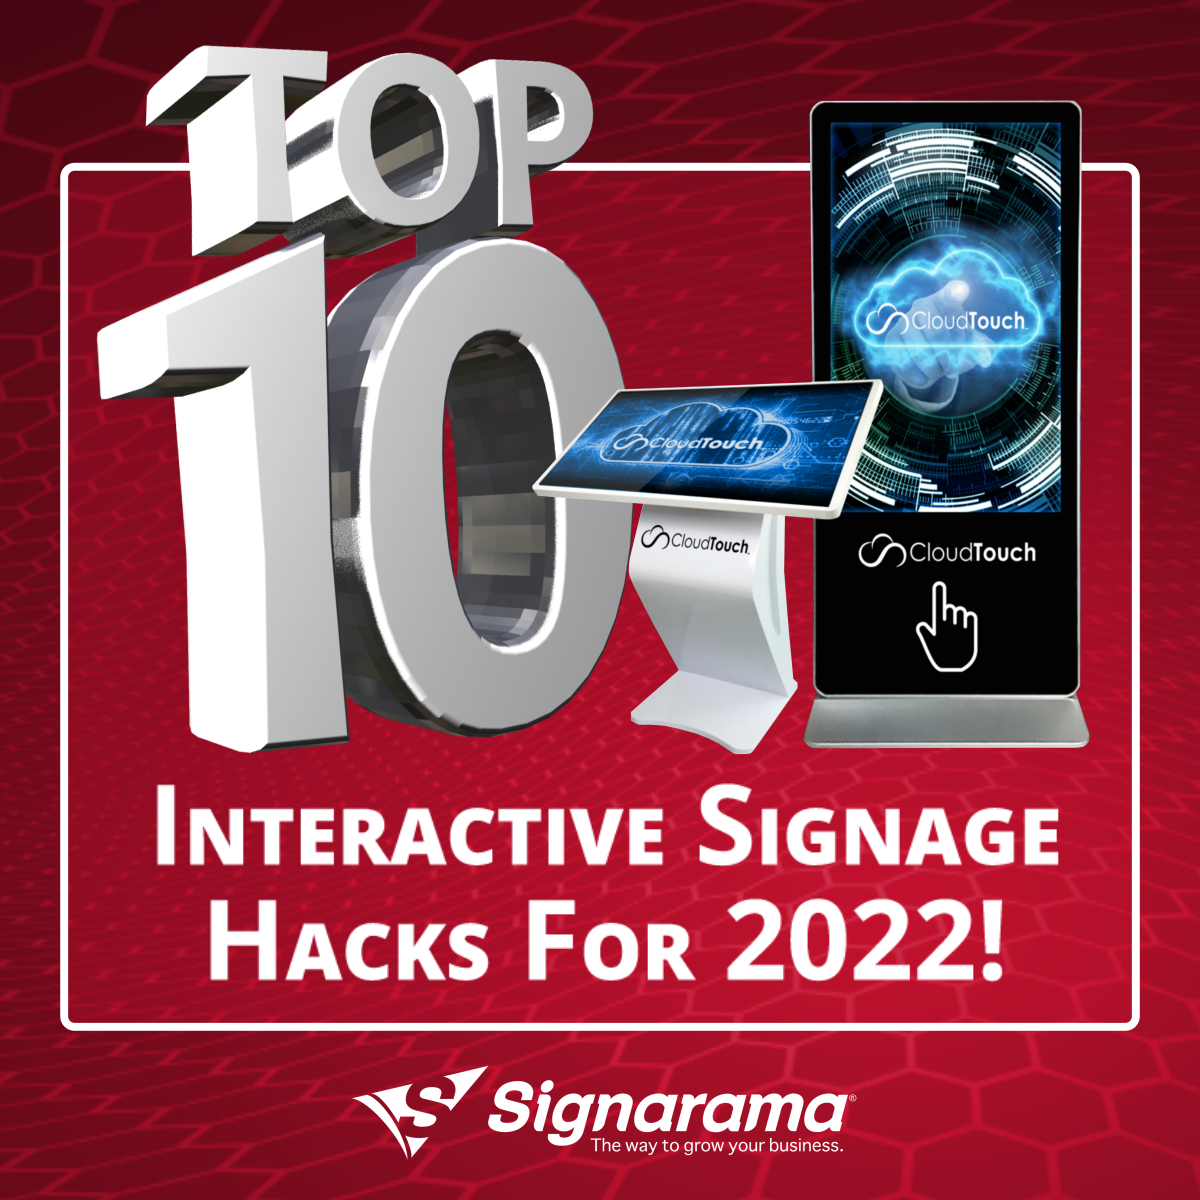 Signarama-Cloud-Touch-Top-10-Interactive-Signage-Hacks-For-2022-Events_Square